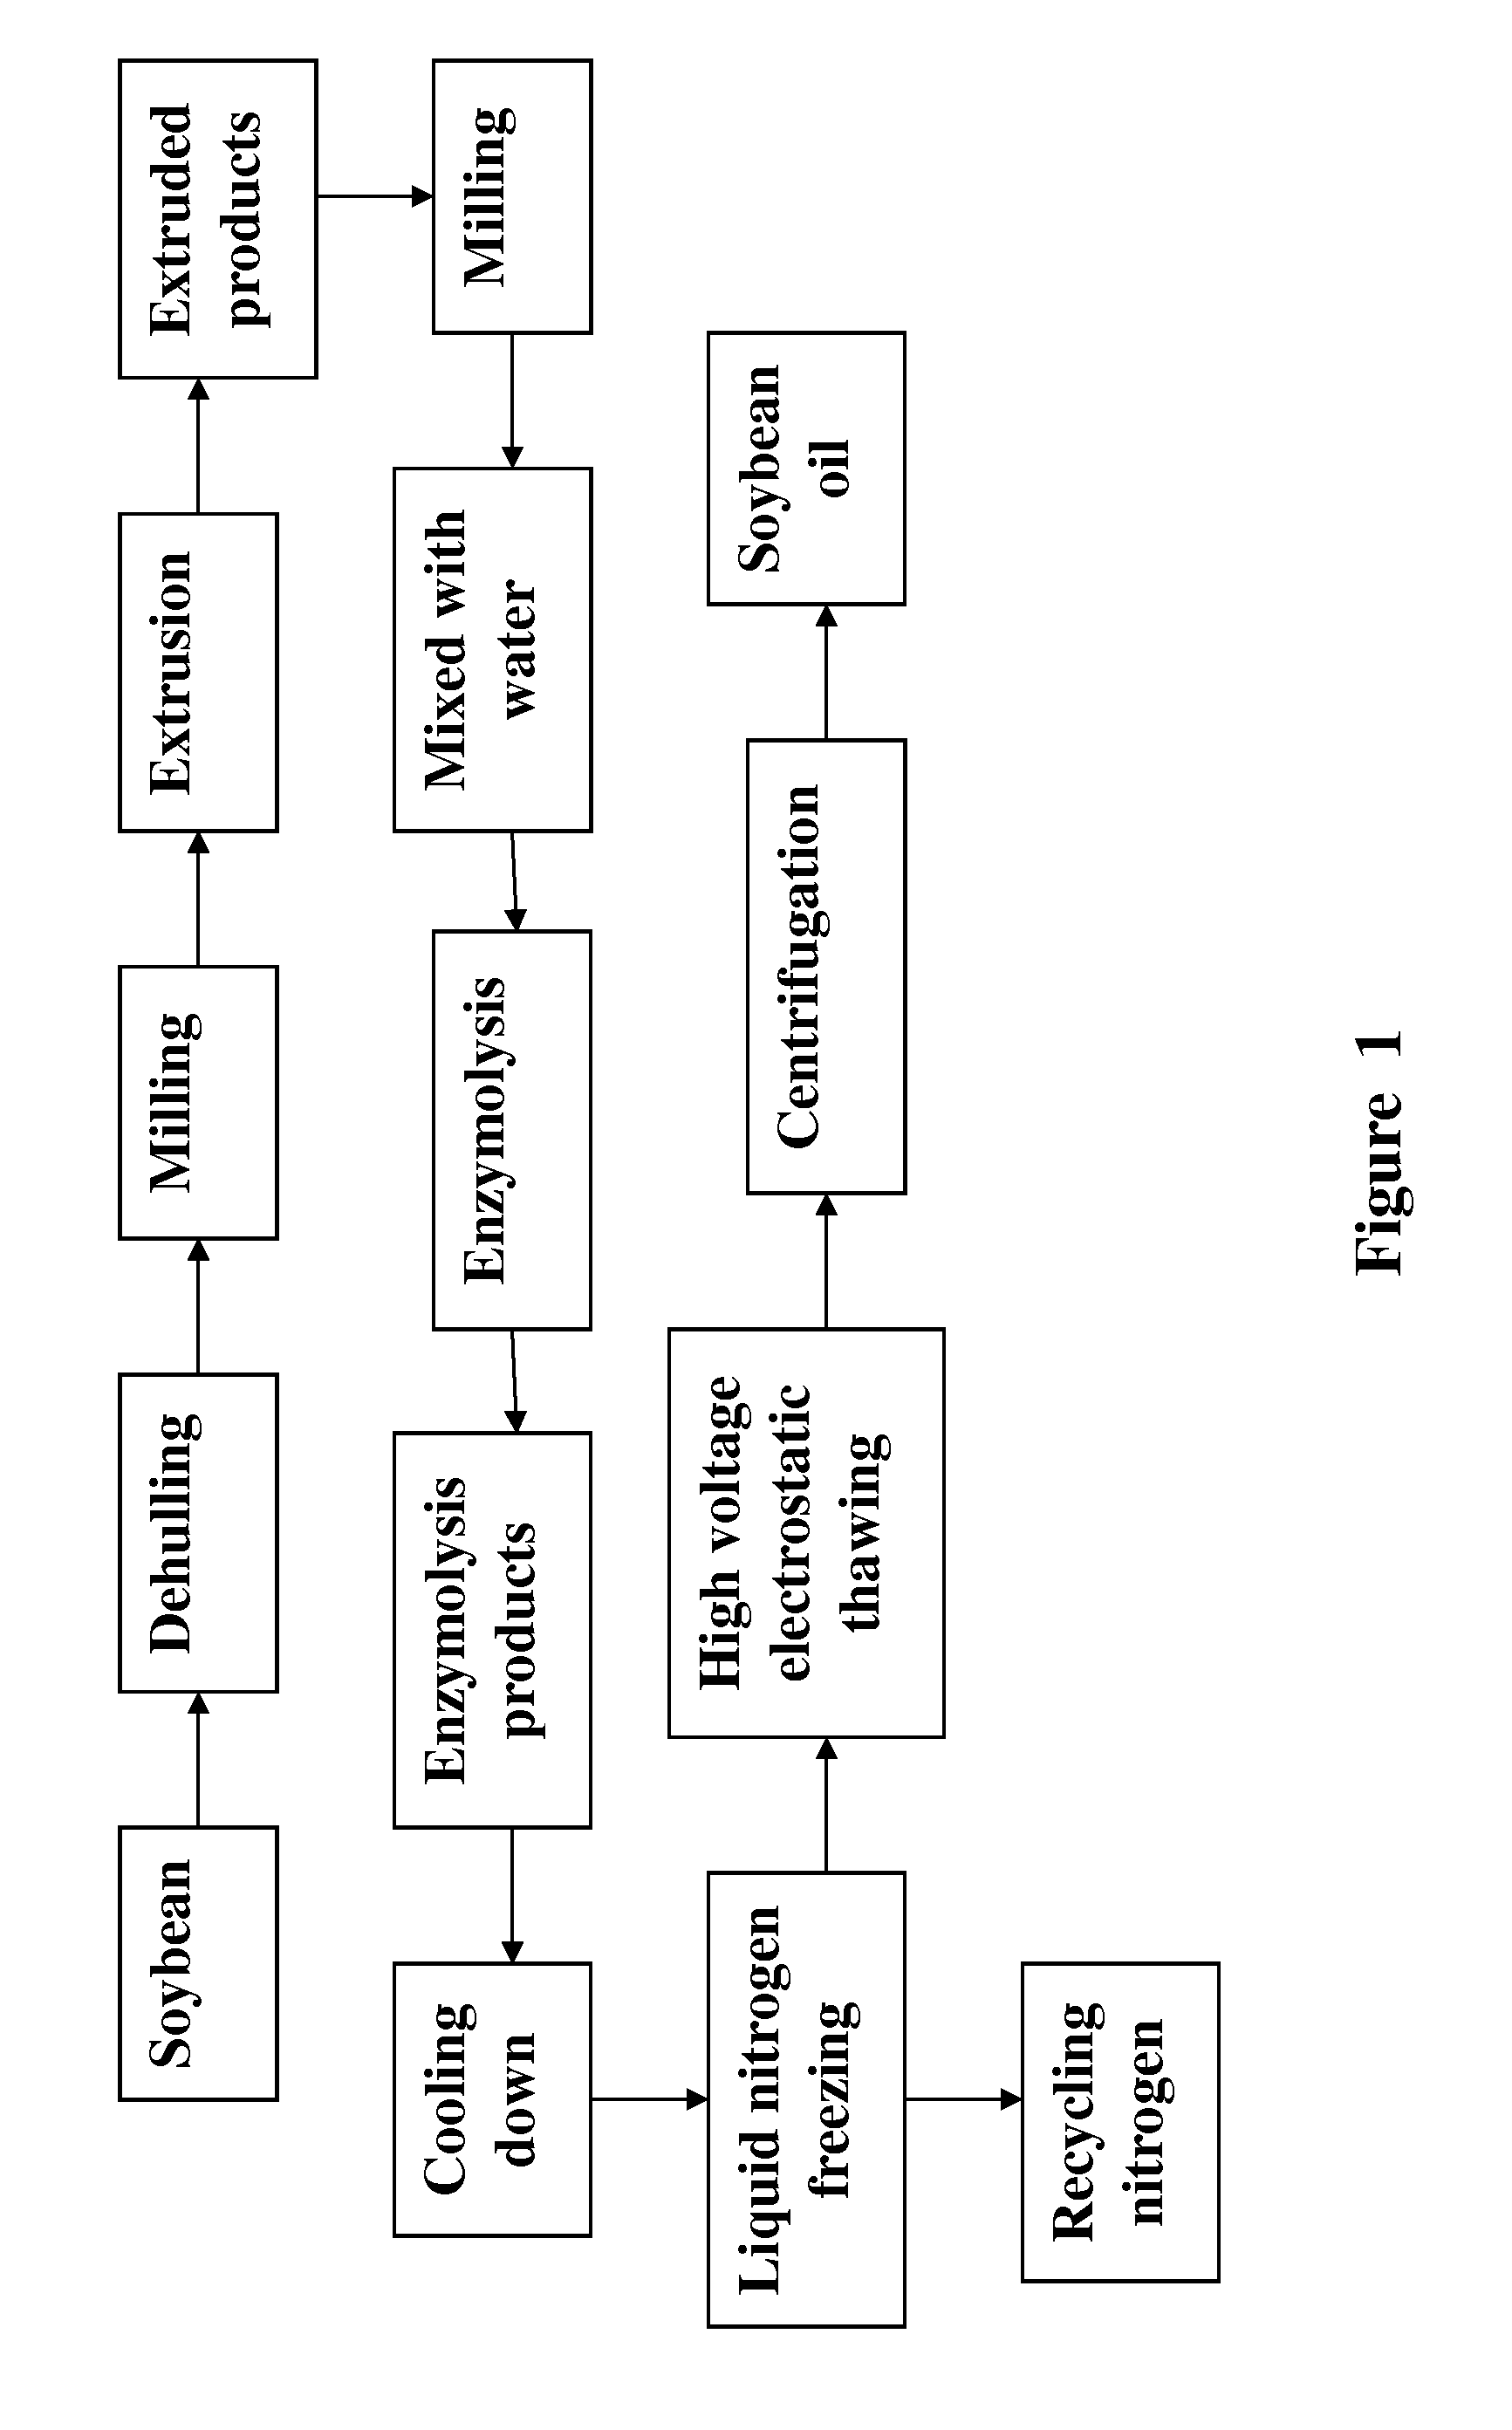 Method for Aqueous Enzymatic Extraction of Soybean Oil